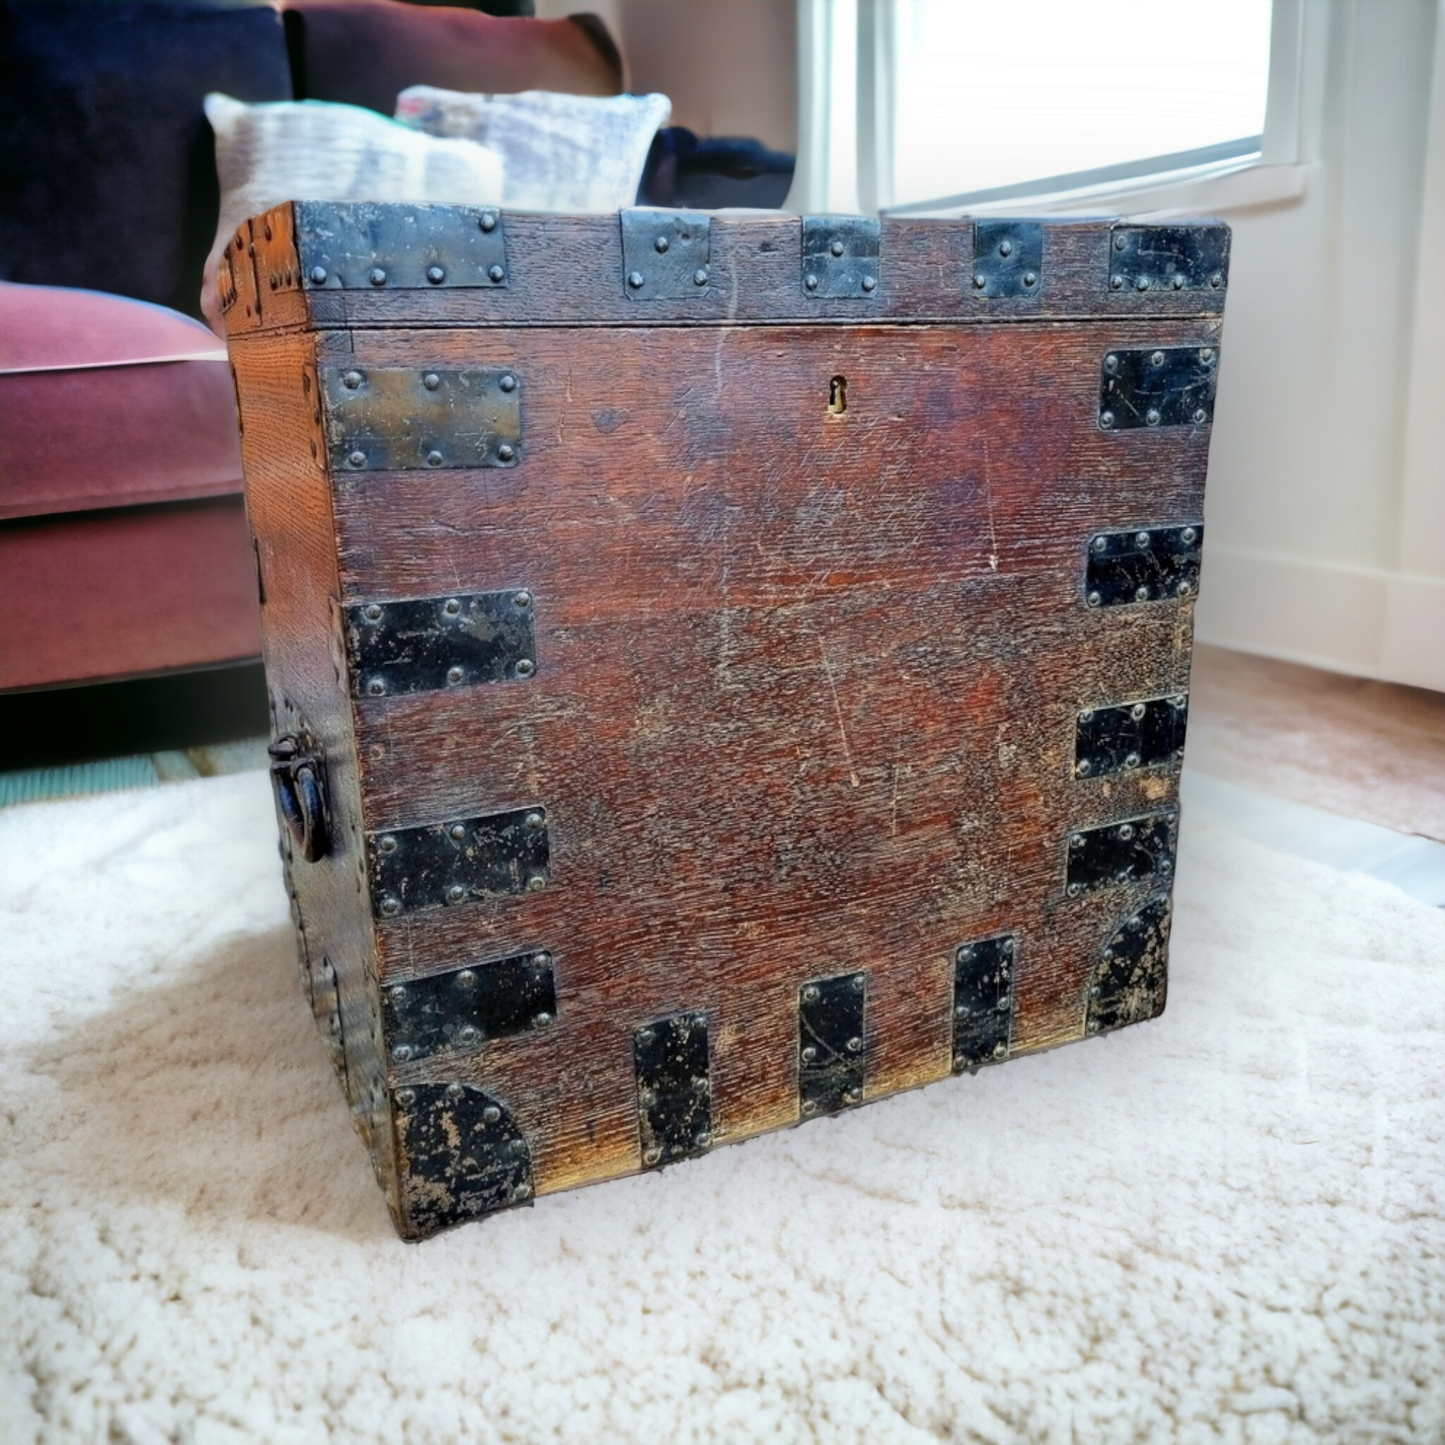 Ideal As A Sofa-Side Table - A 19th Century English Antique Iron-Bound Silver Chest